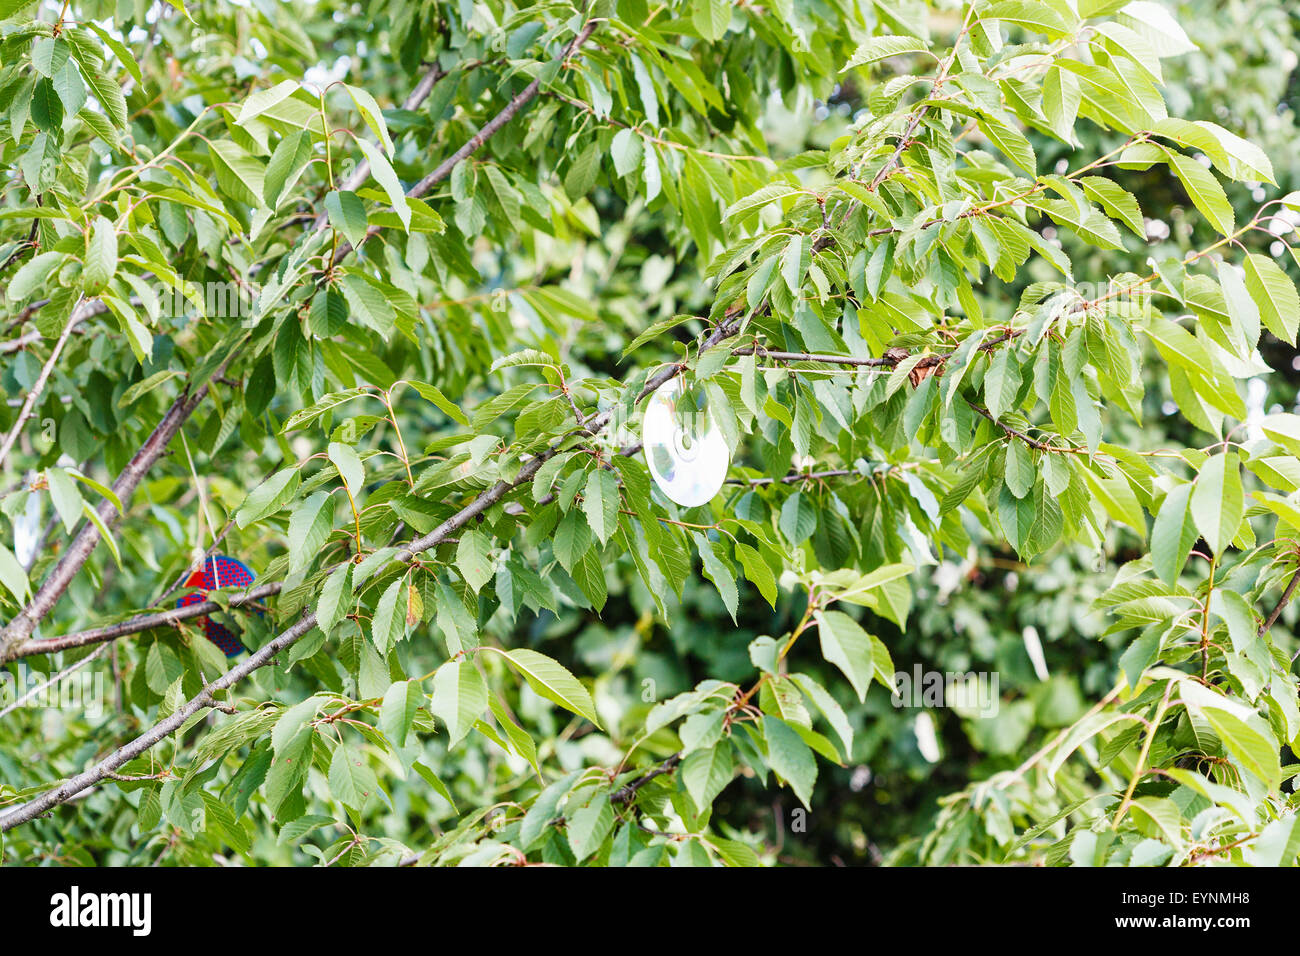 compact disc on black cherry tree to scare birds in orchard Stock Photo